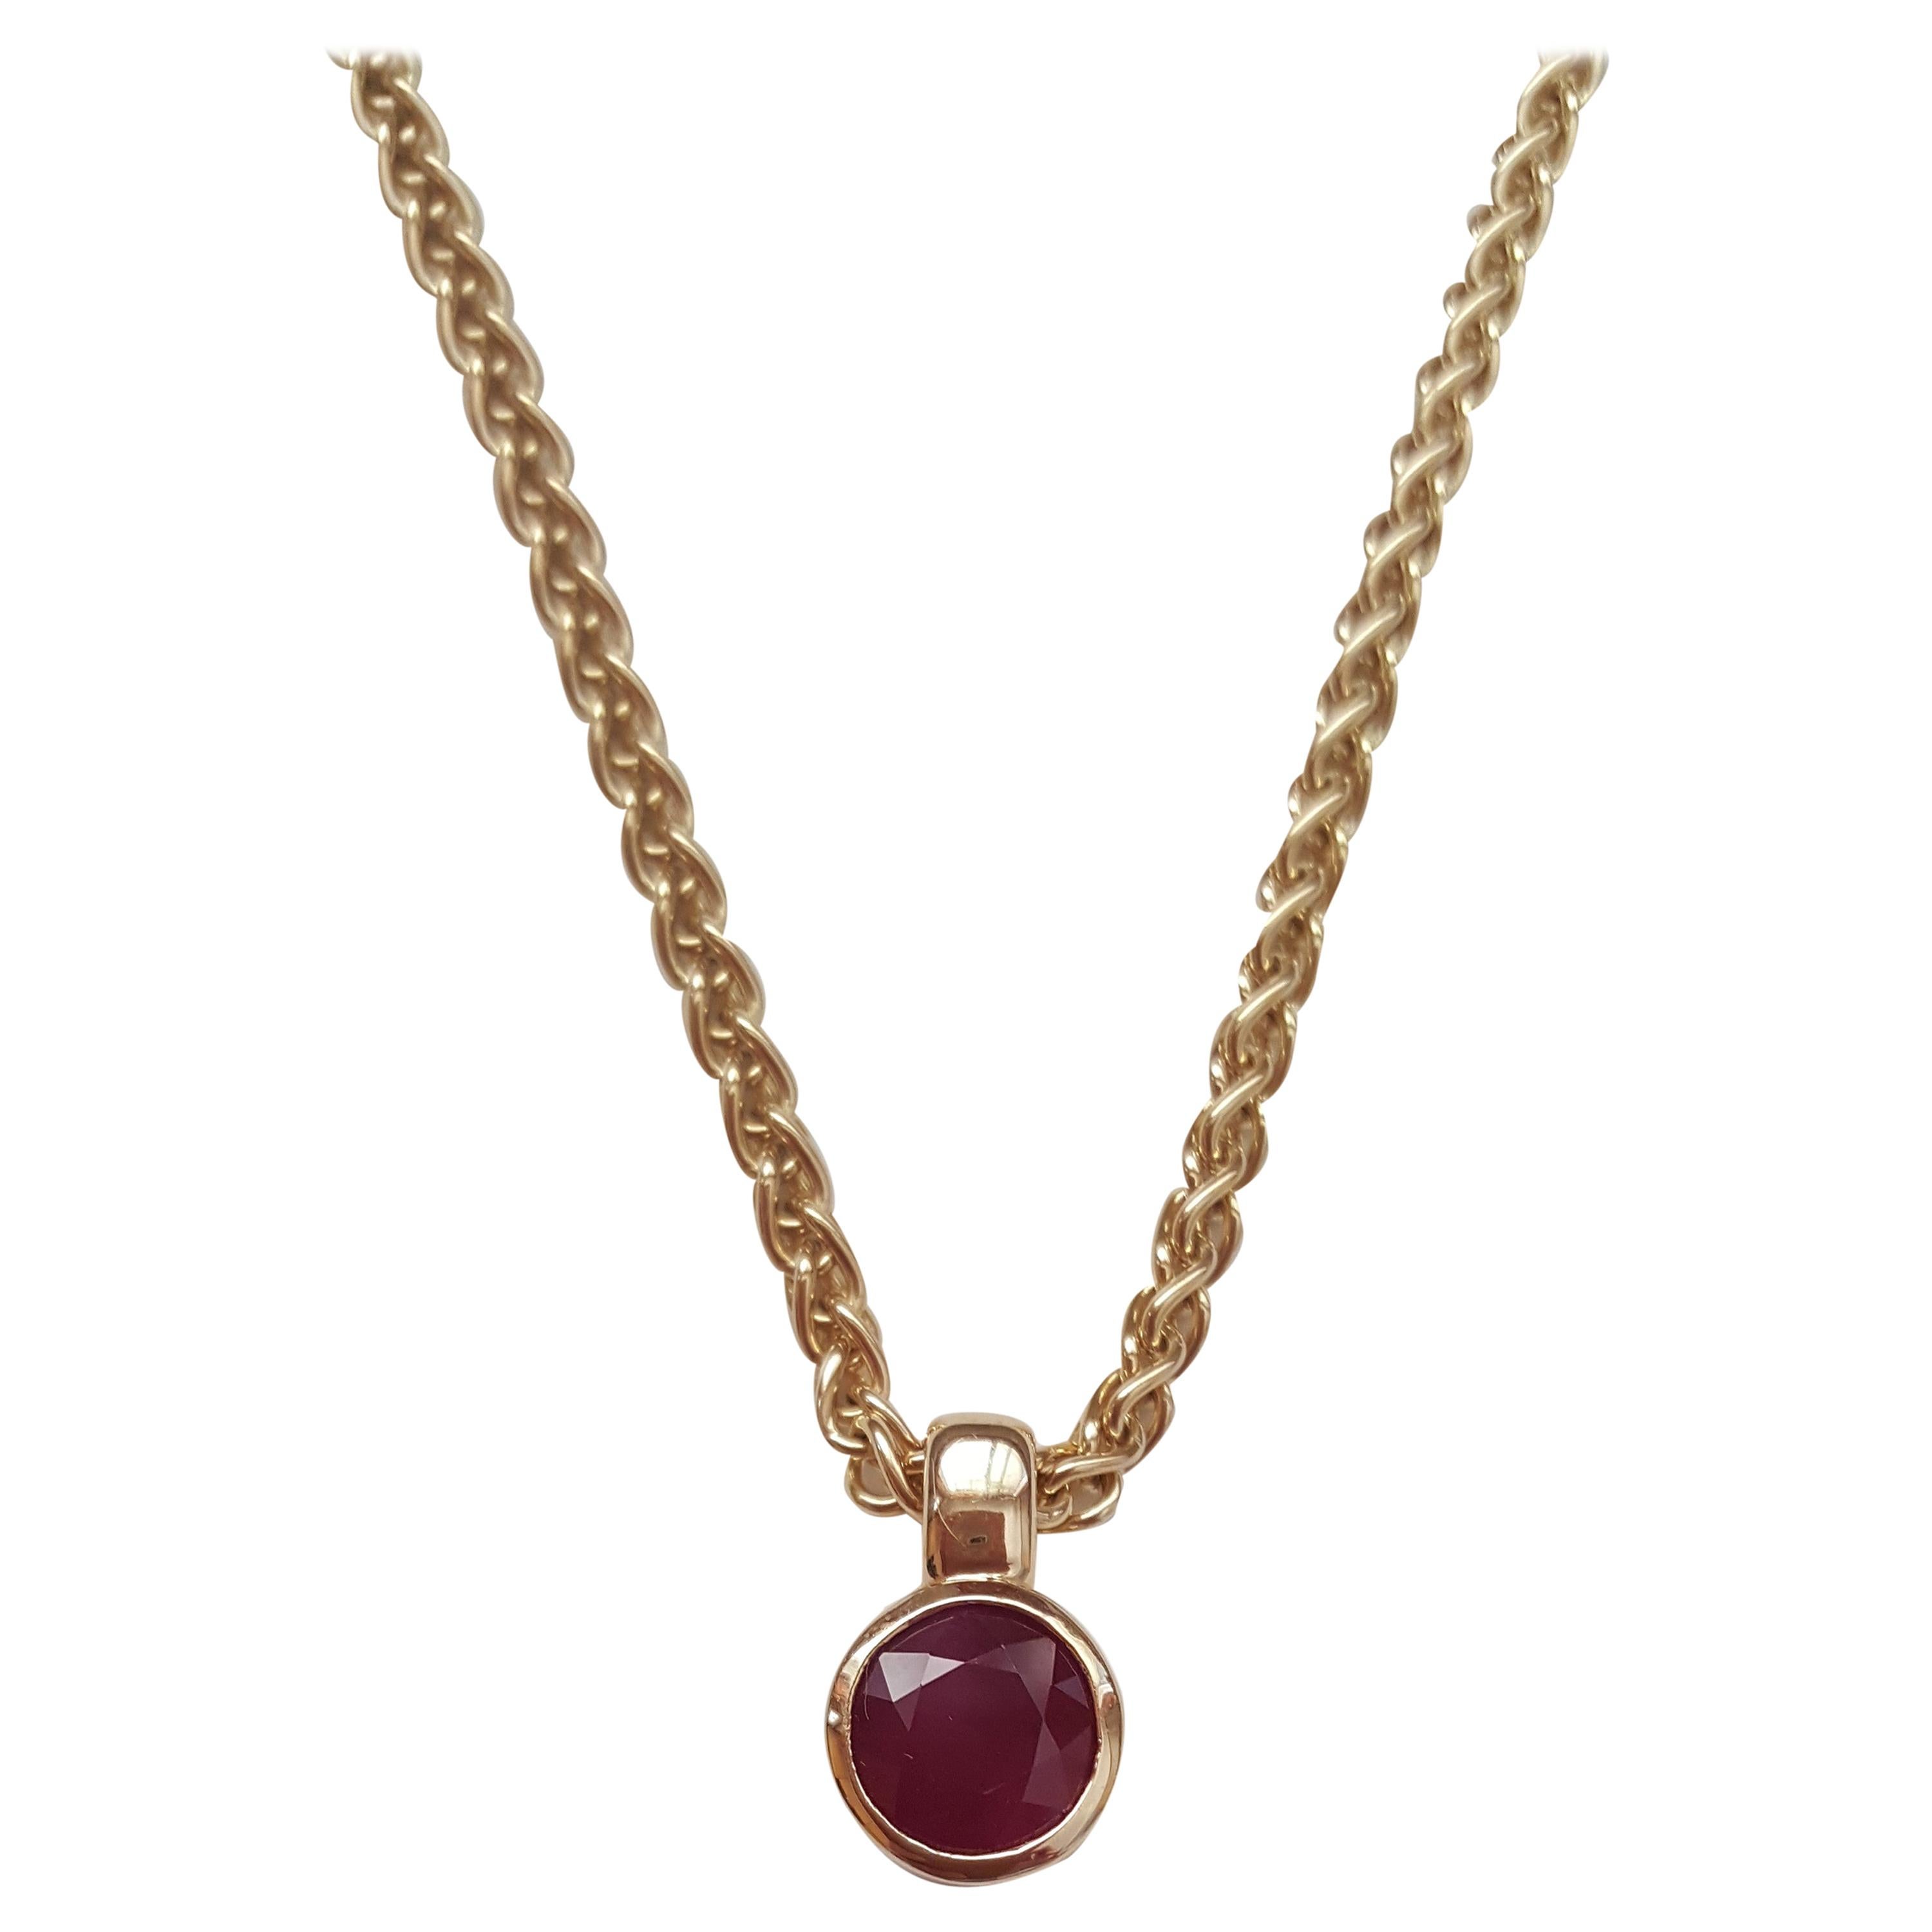 14 Karat Gold and Ruby Necklace, 26' Wheat Link Chain,  2.50 Carat Ruby, 33.4 Gr